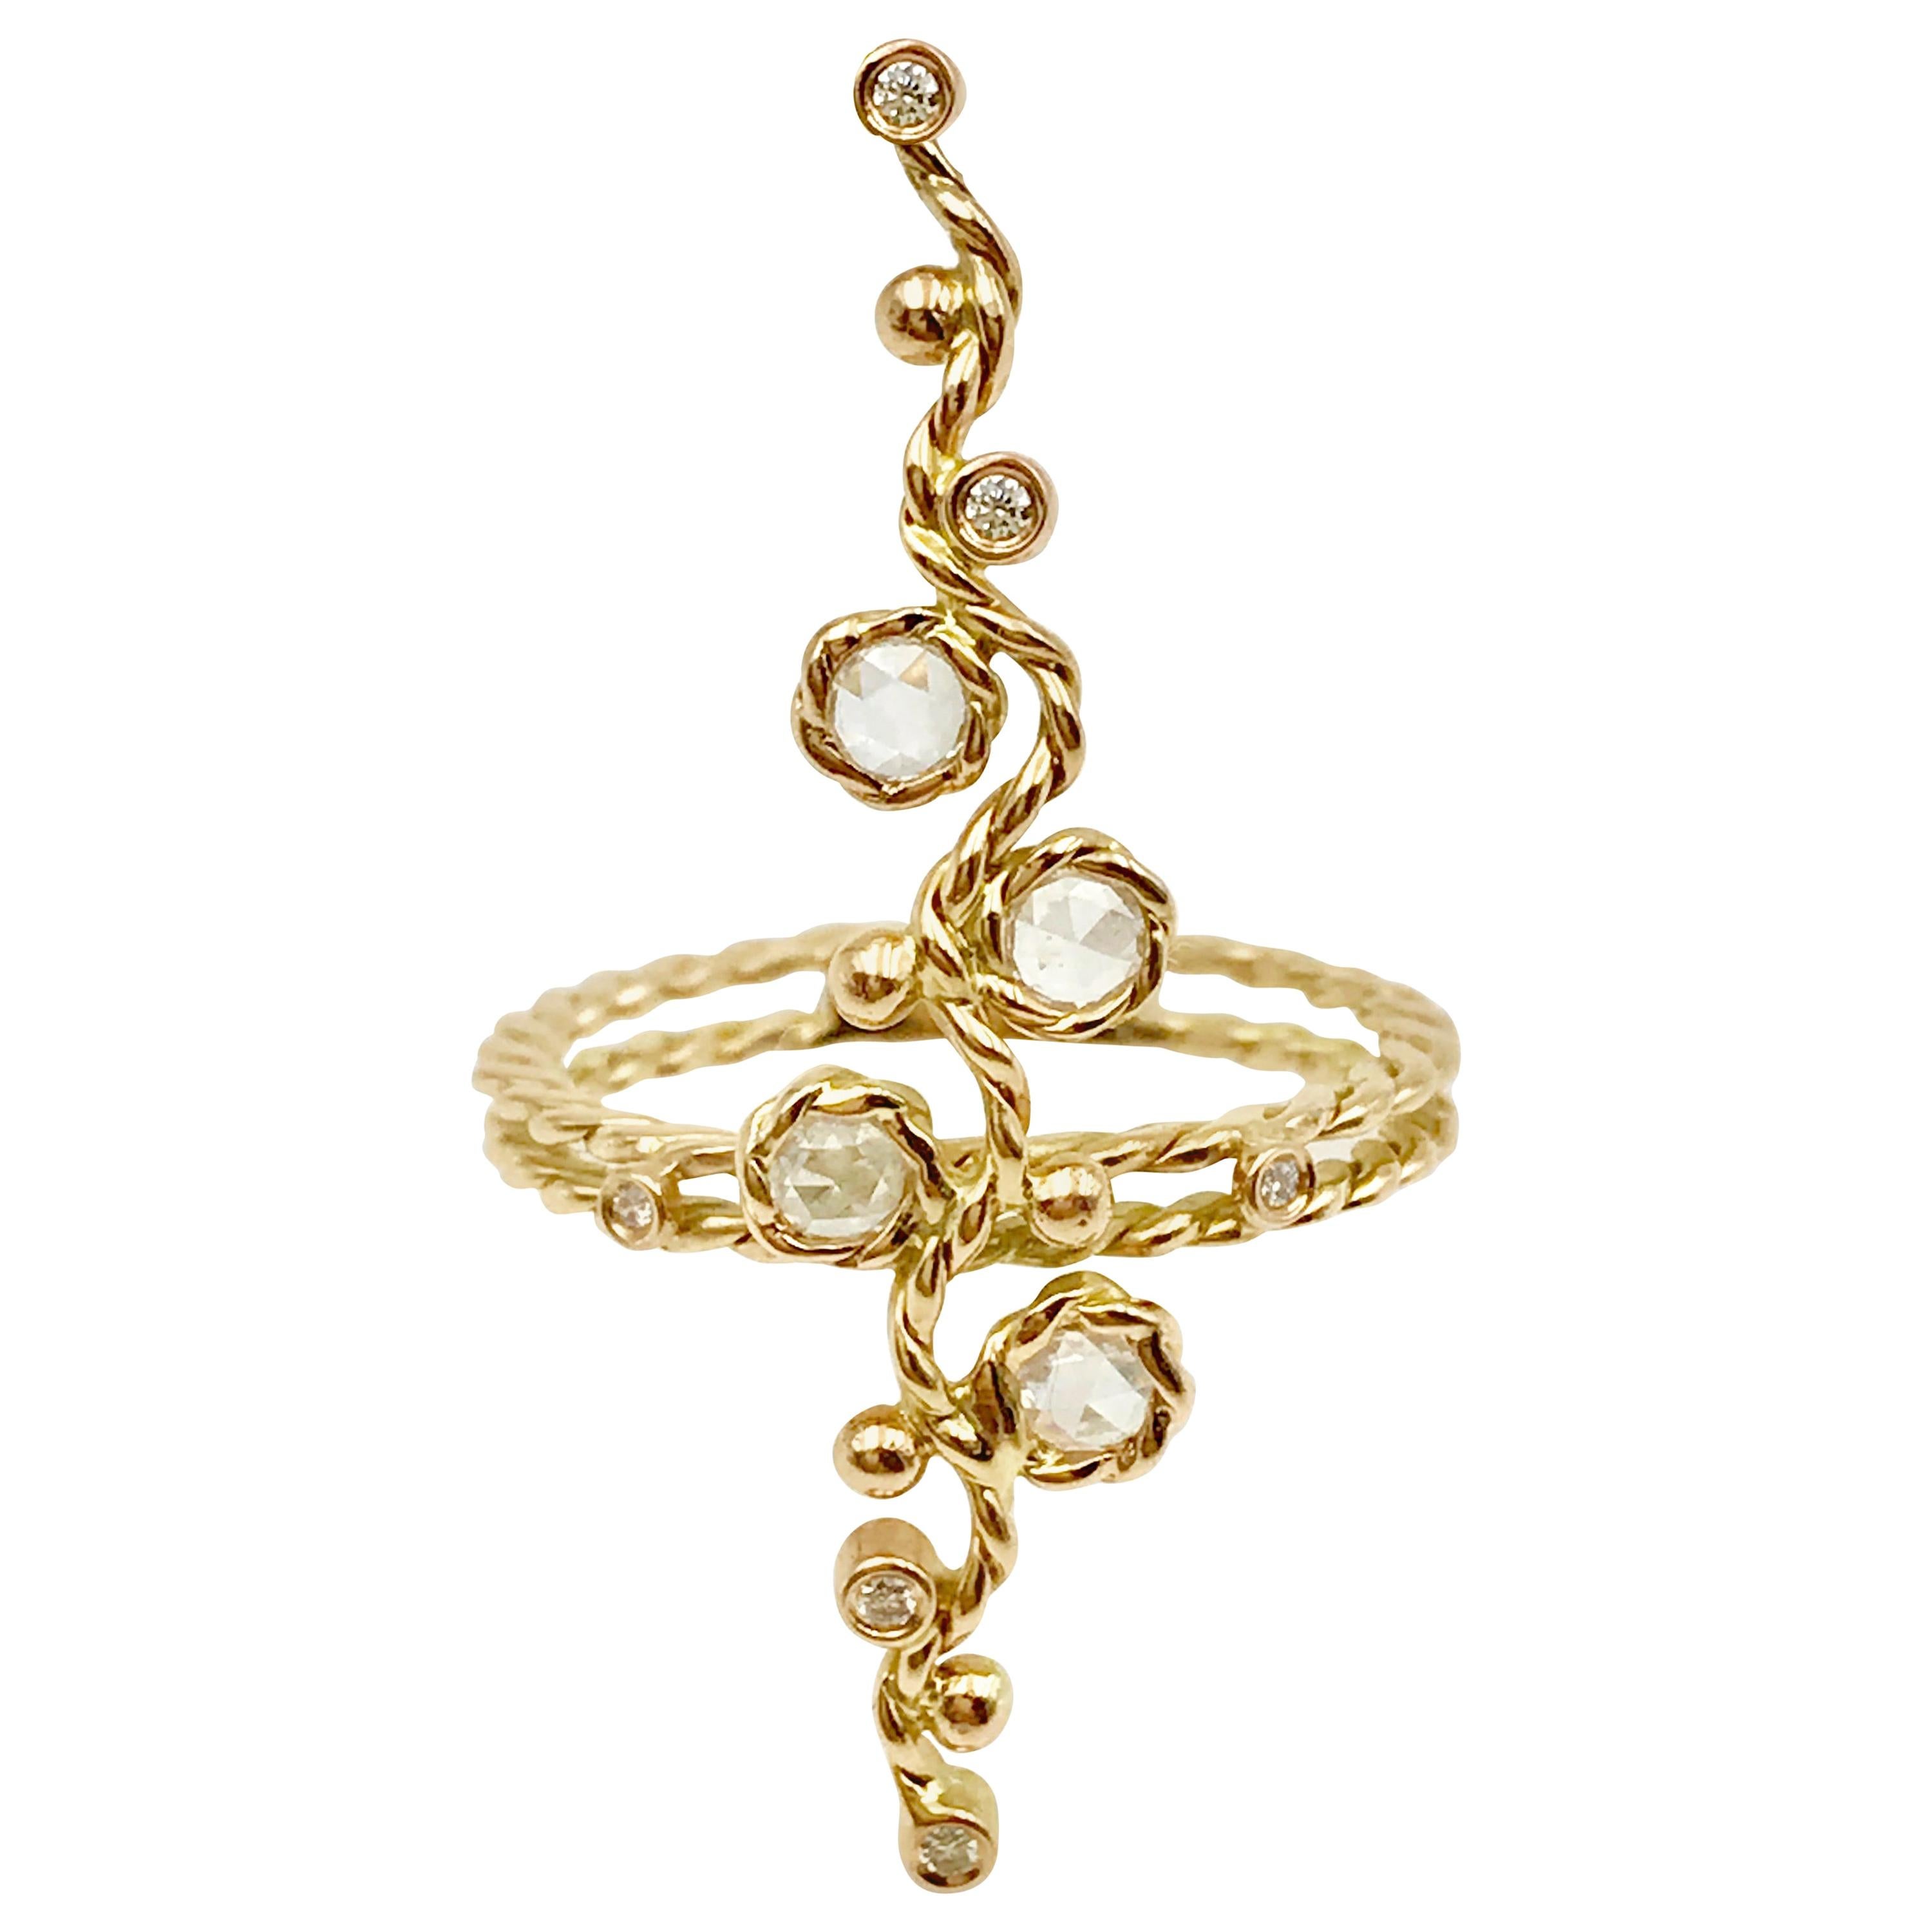 For Sale:  Calliope Rose Cut Diamond Vertical Wavy Bar Ring in 18k Gold